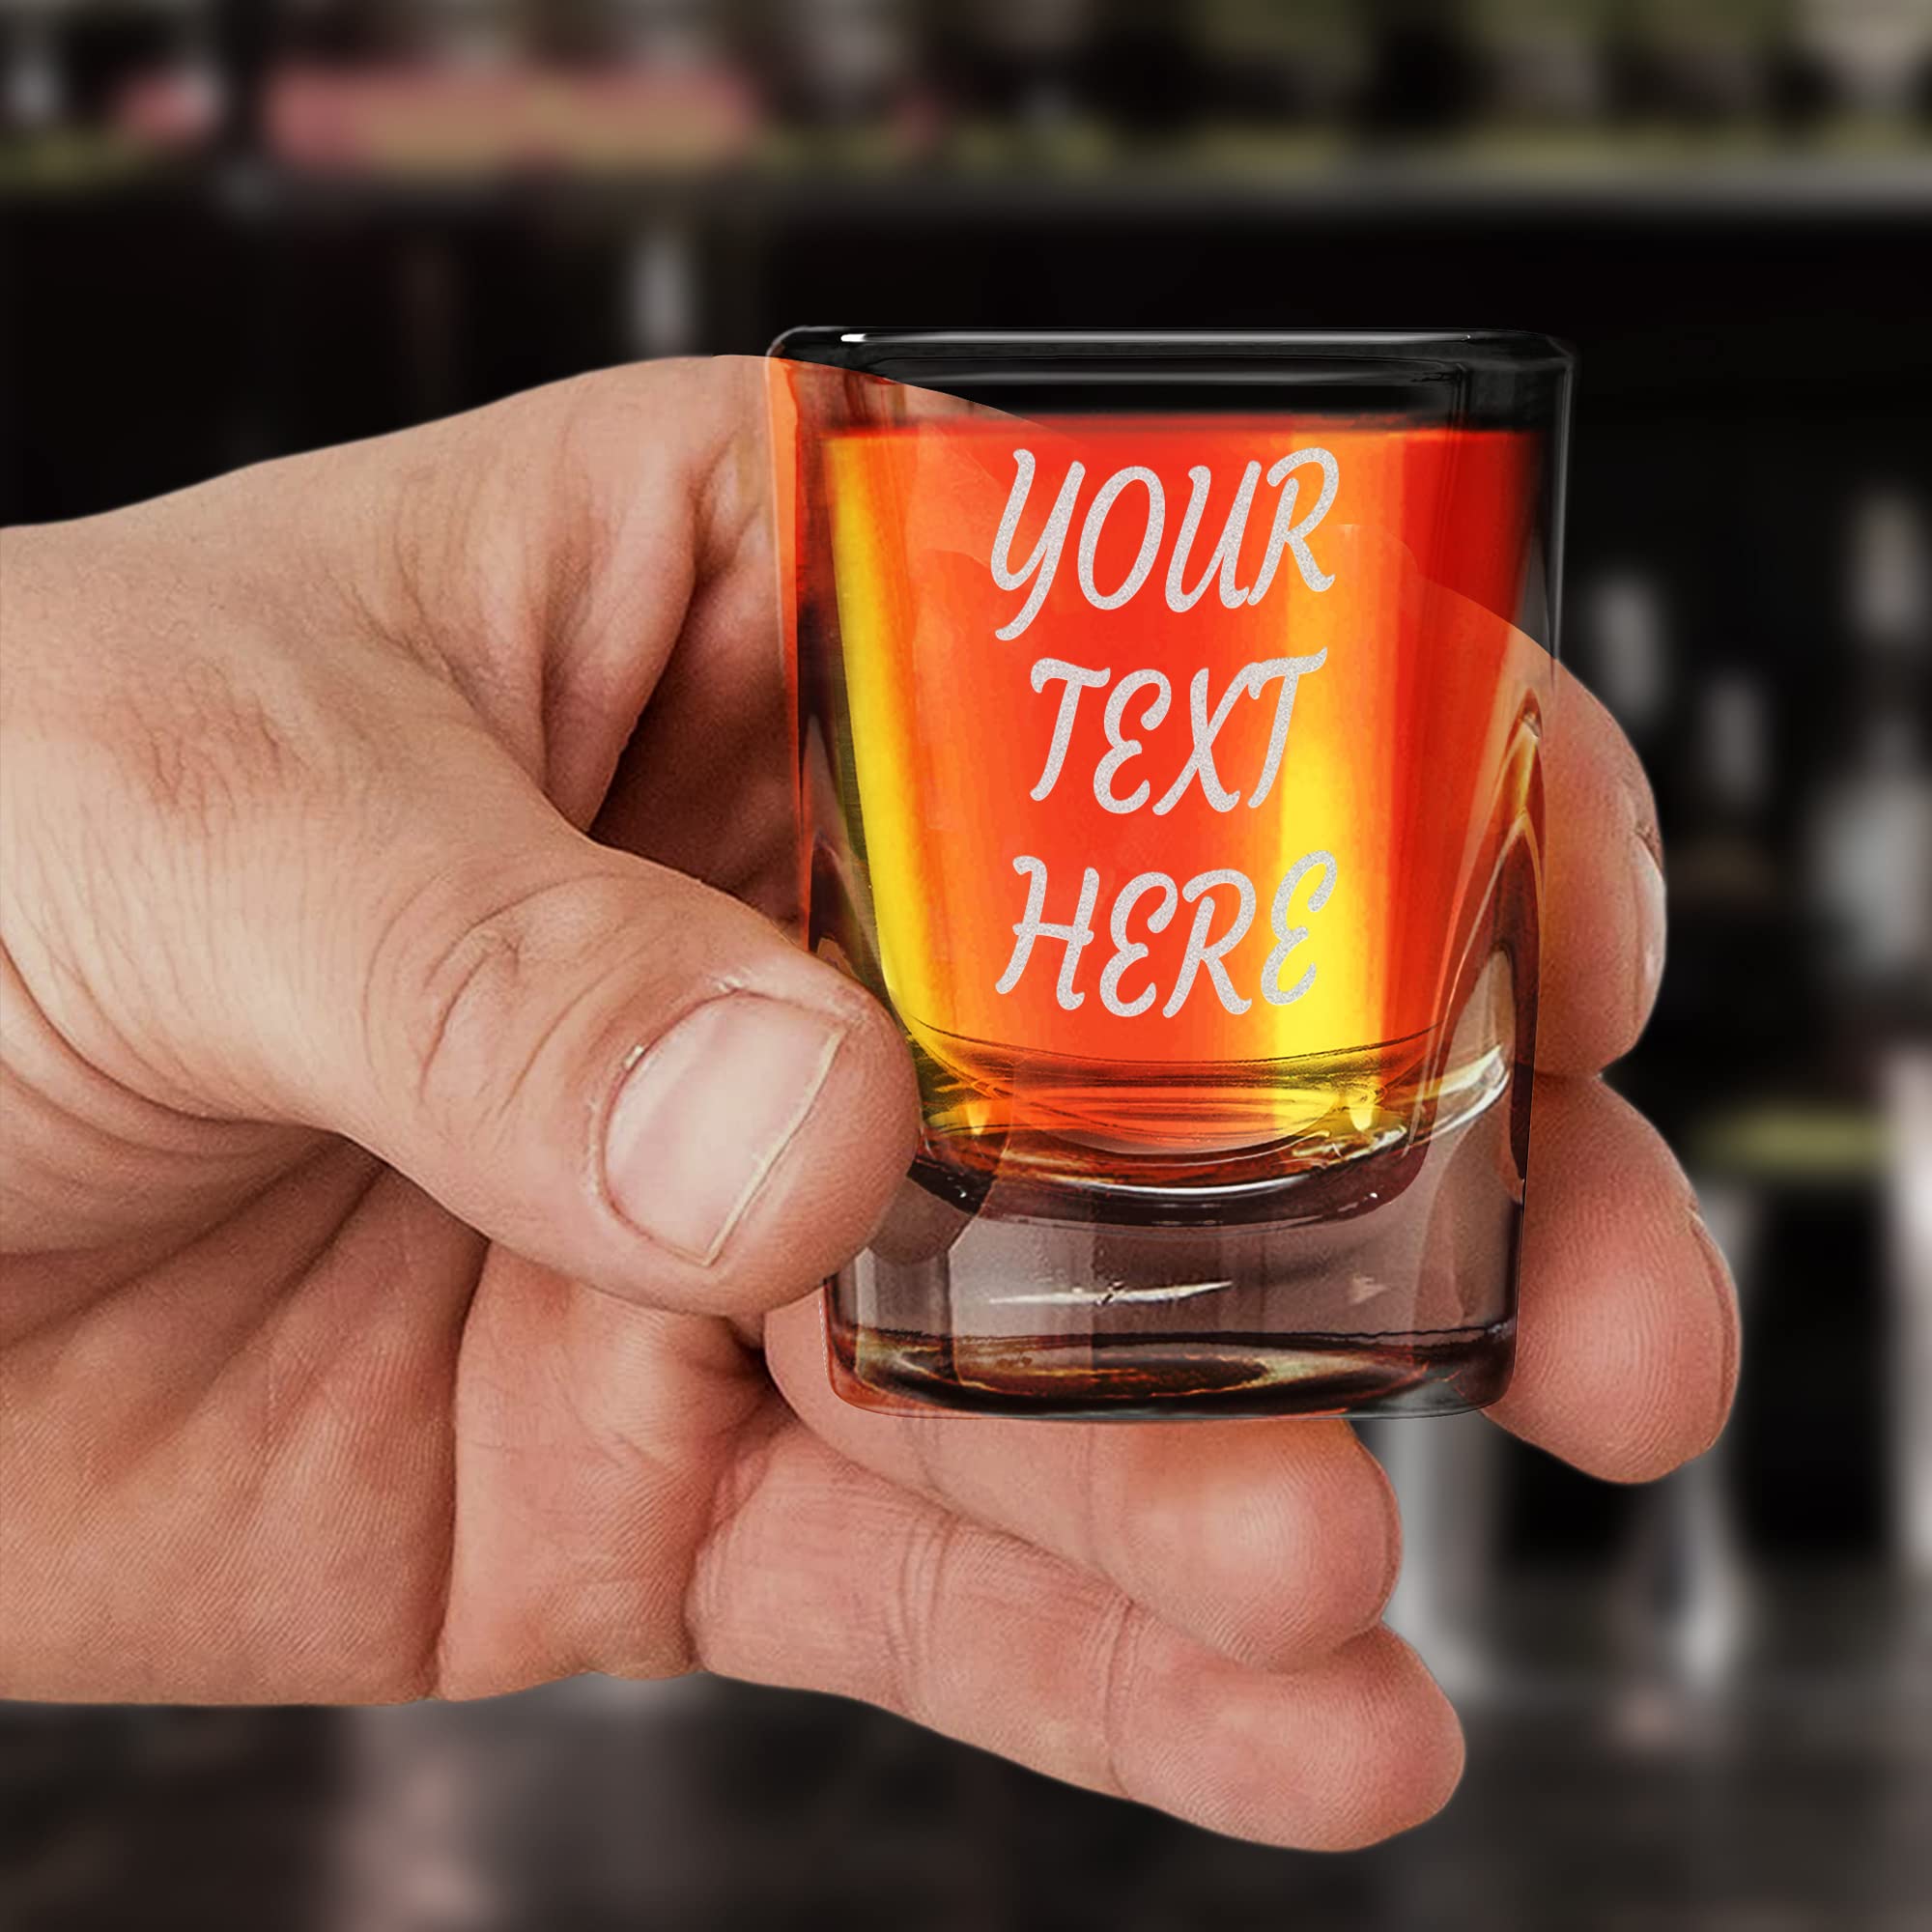 Custom Personalized Your Text Shot Glass 2 oz.